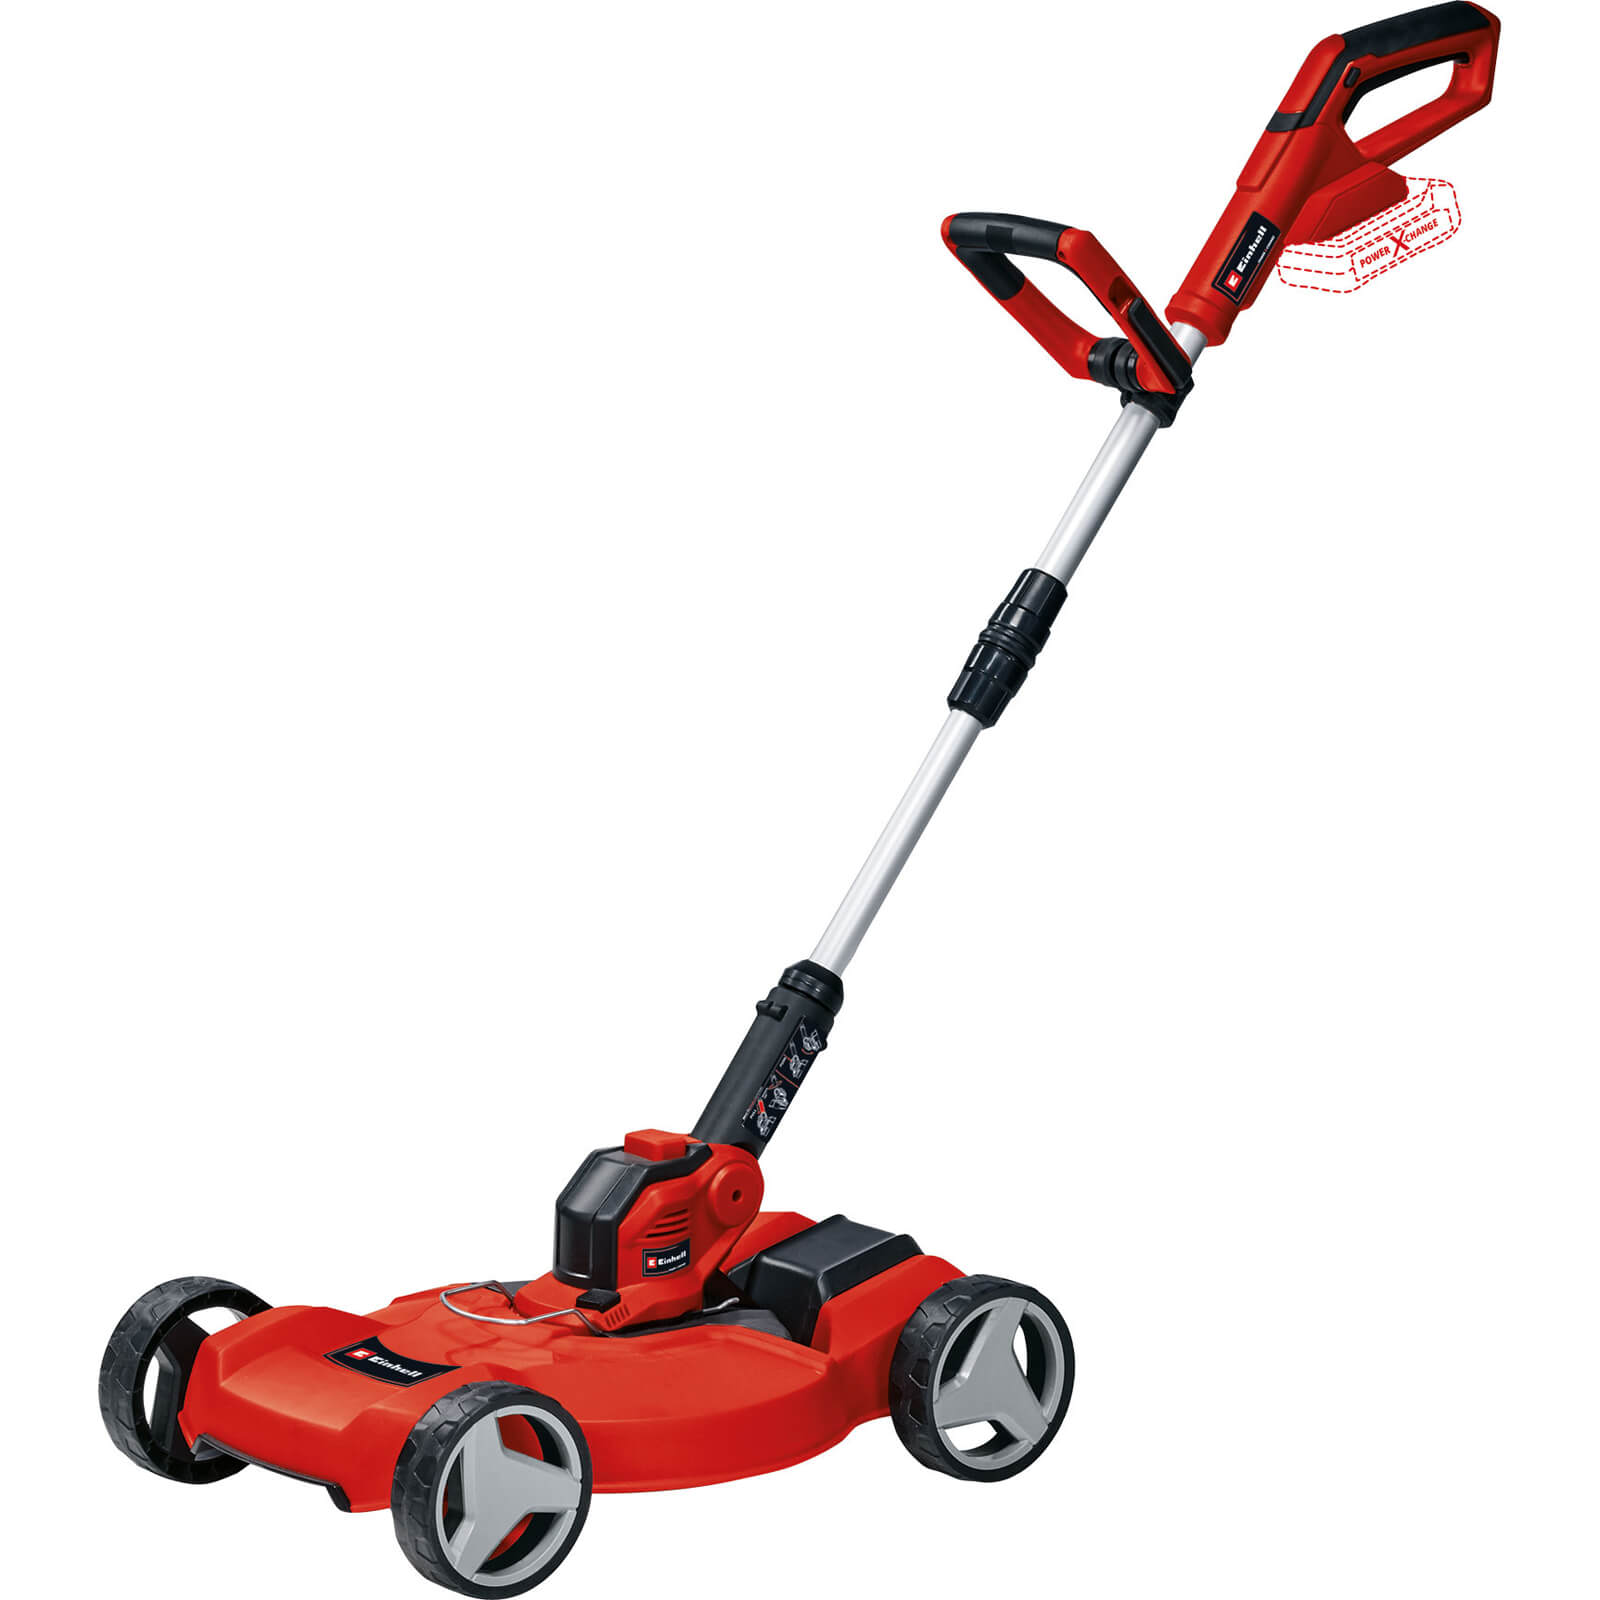 Einhell GE-CT 1828 Li TC 18v Cordless Grass Trimmer and Edger 280mm No Batteries No Charger